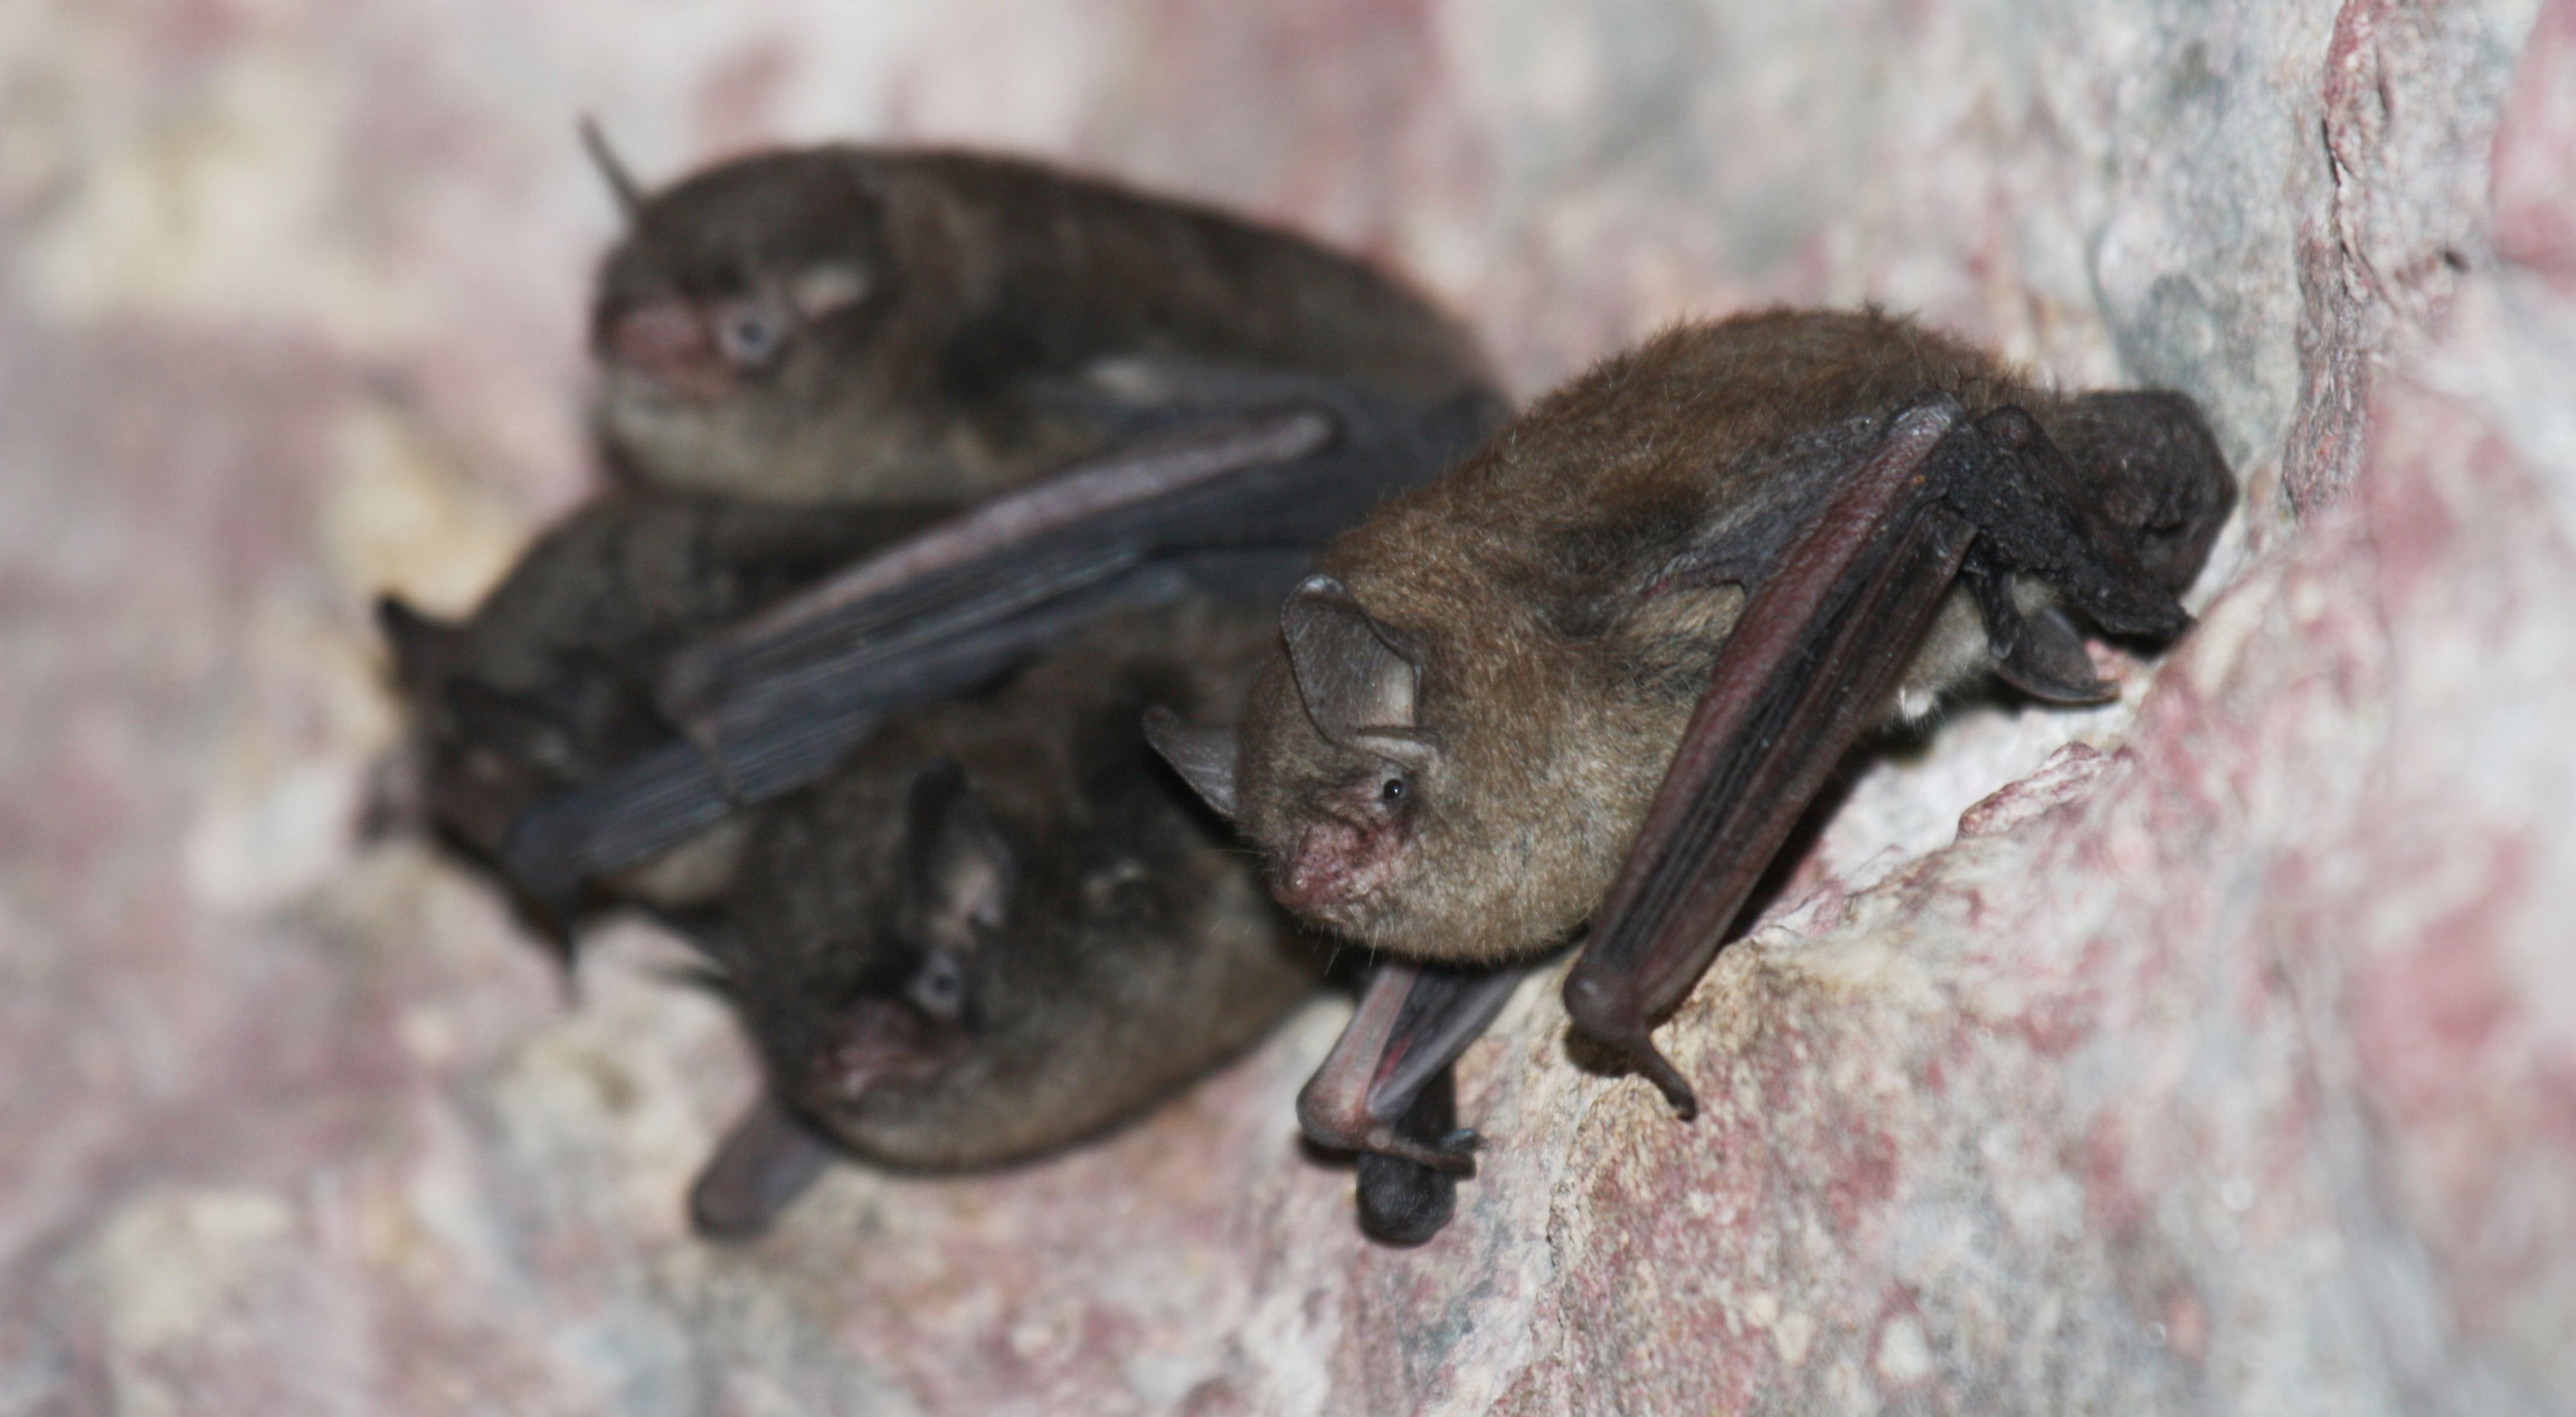 A group of 4 small bats cluster to a cave wall.